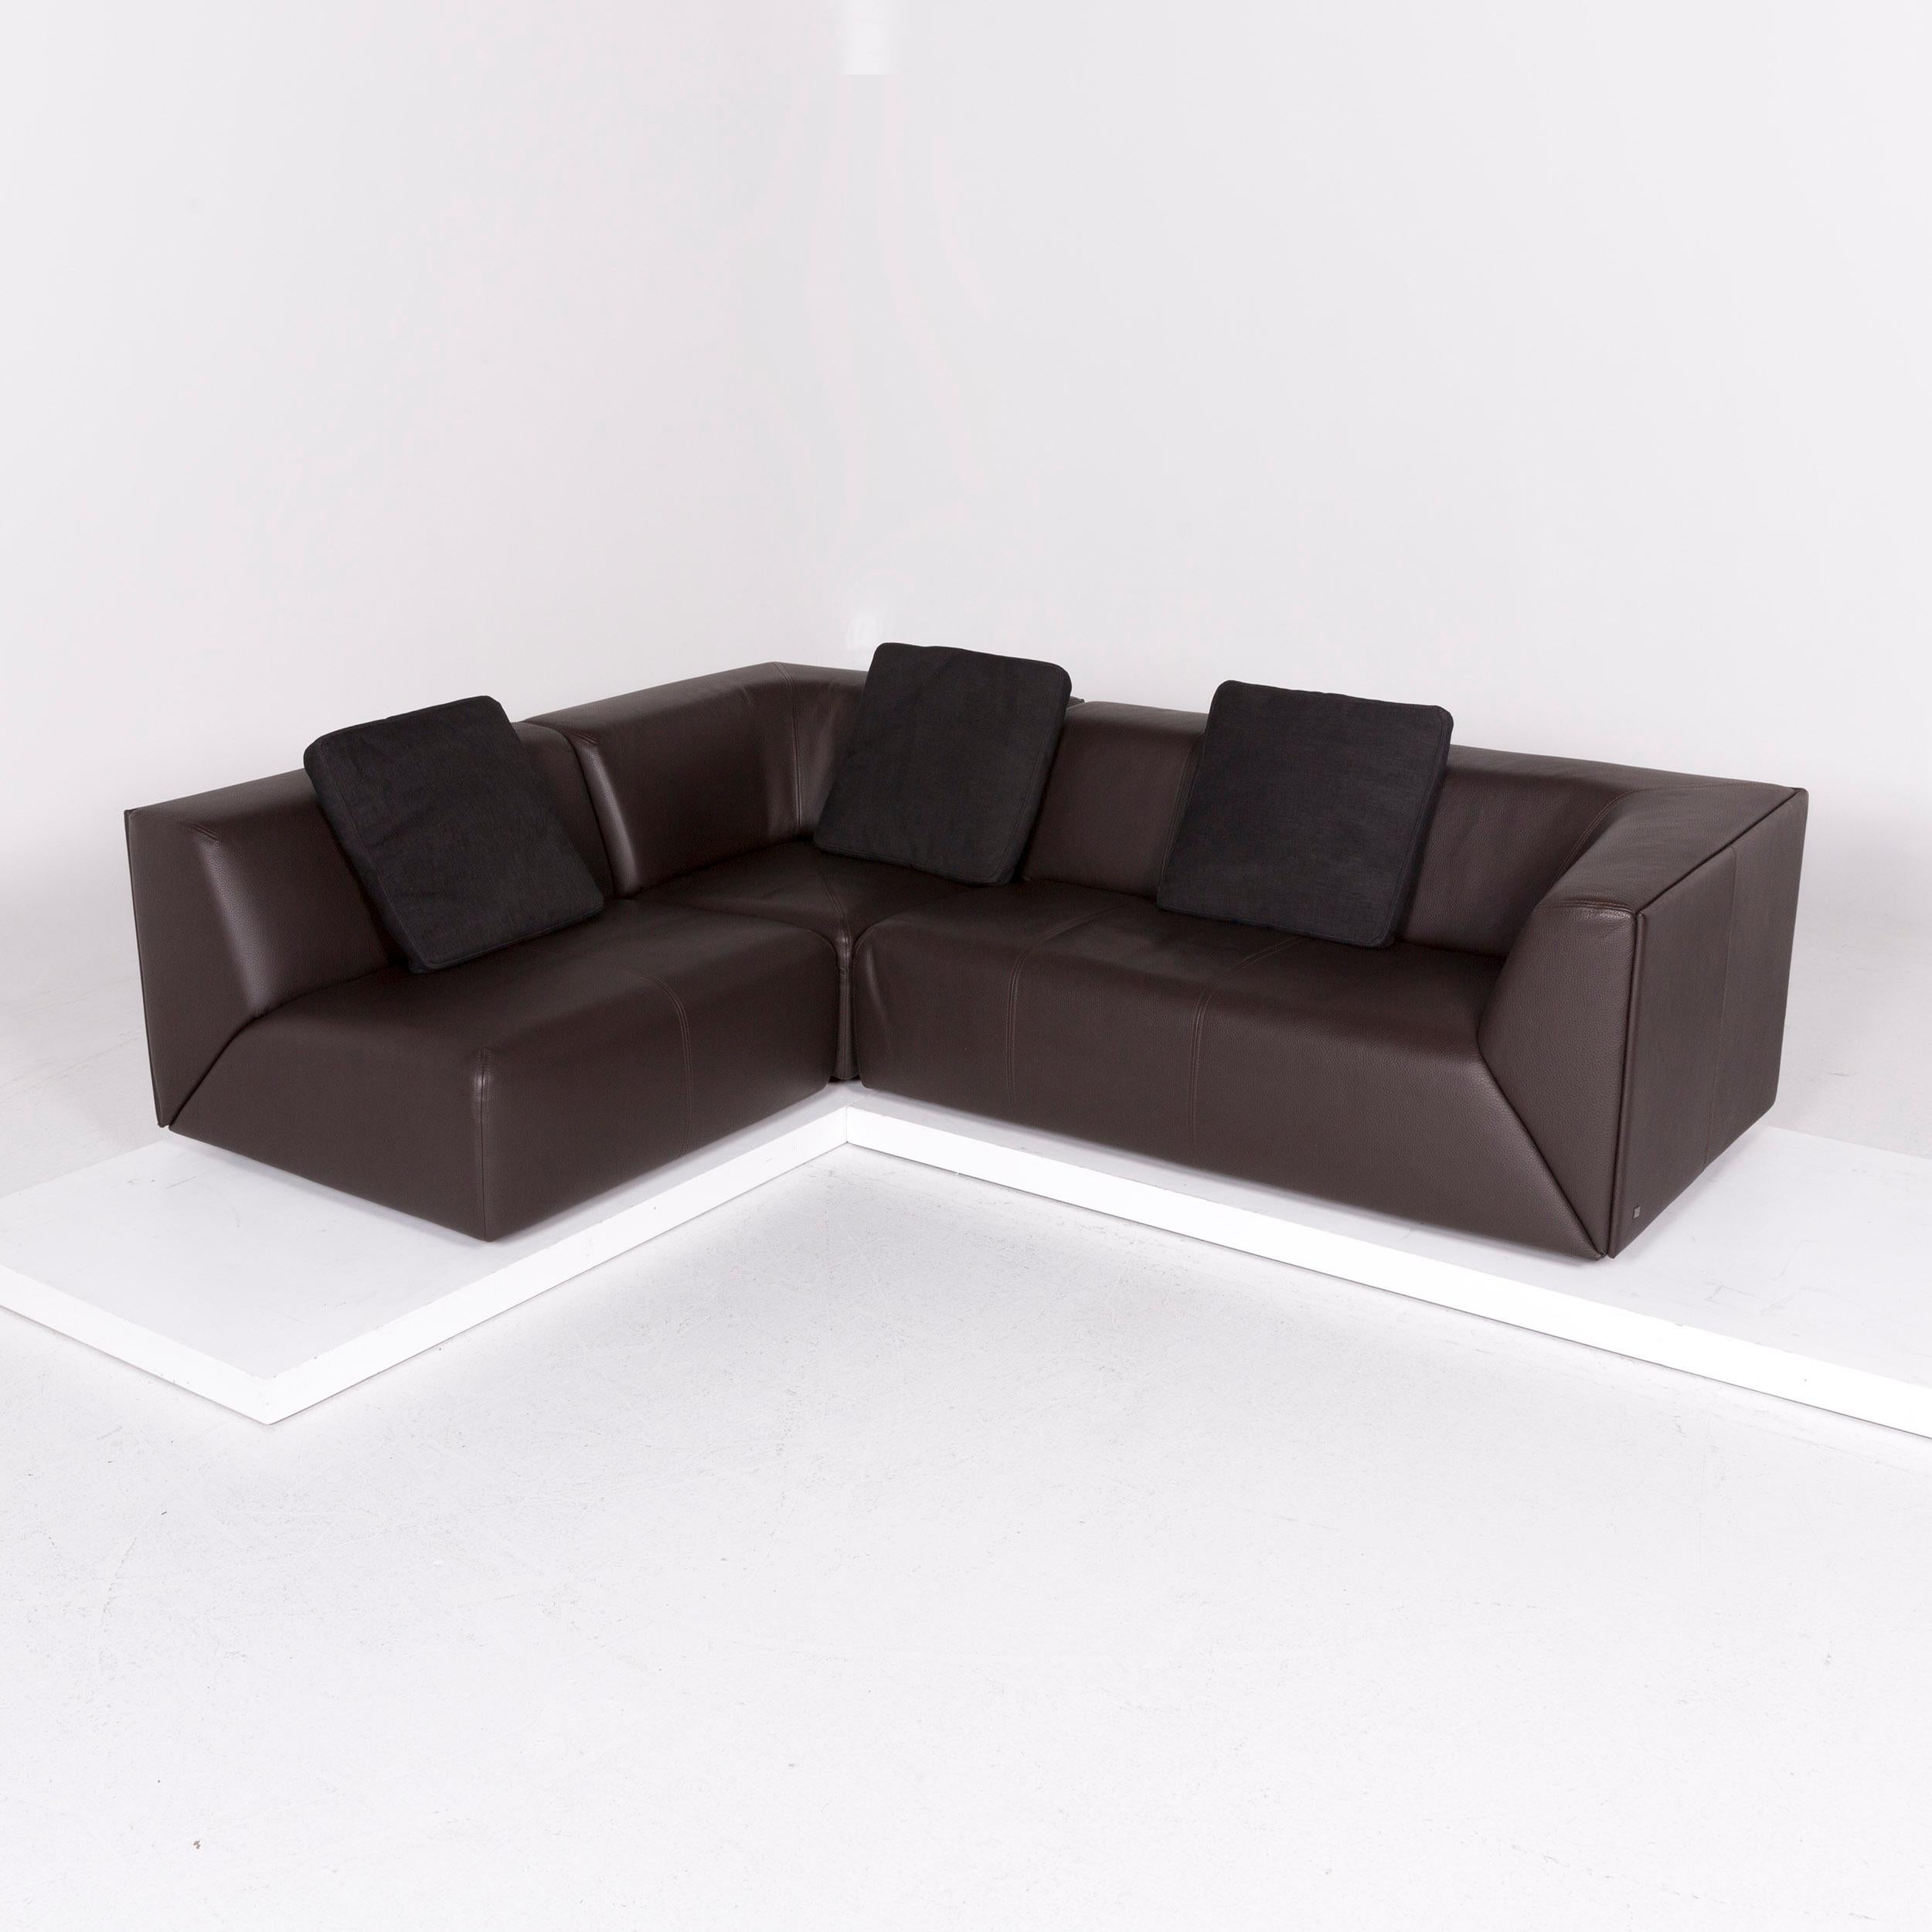 We bring to you a Rolf Benz leather corner sofa brown dark brown sofa couch.

 
 Product measurements in centimeters:
 
 Depth 97
Width 198
Height 71
Seat-height 40
Rest-height 71
Seat-depth 61
Seat-width 162
Back-height 32.